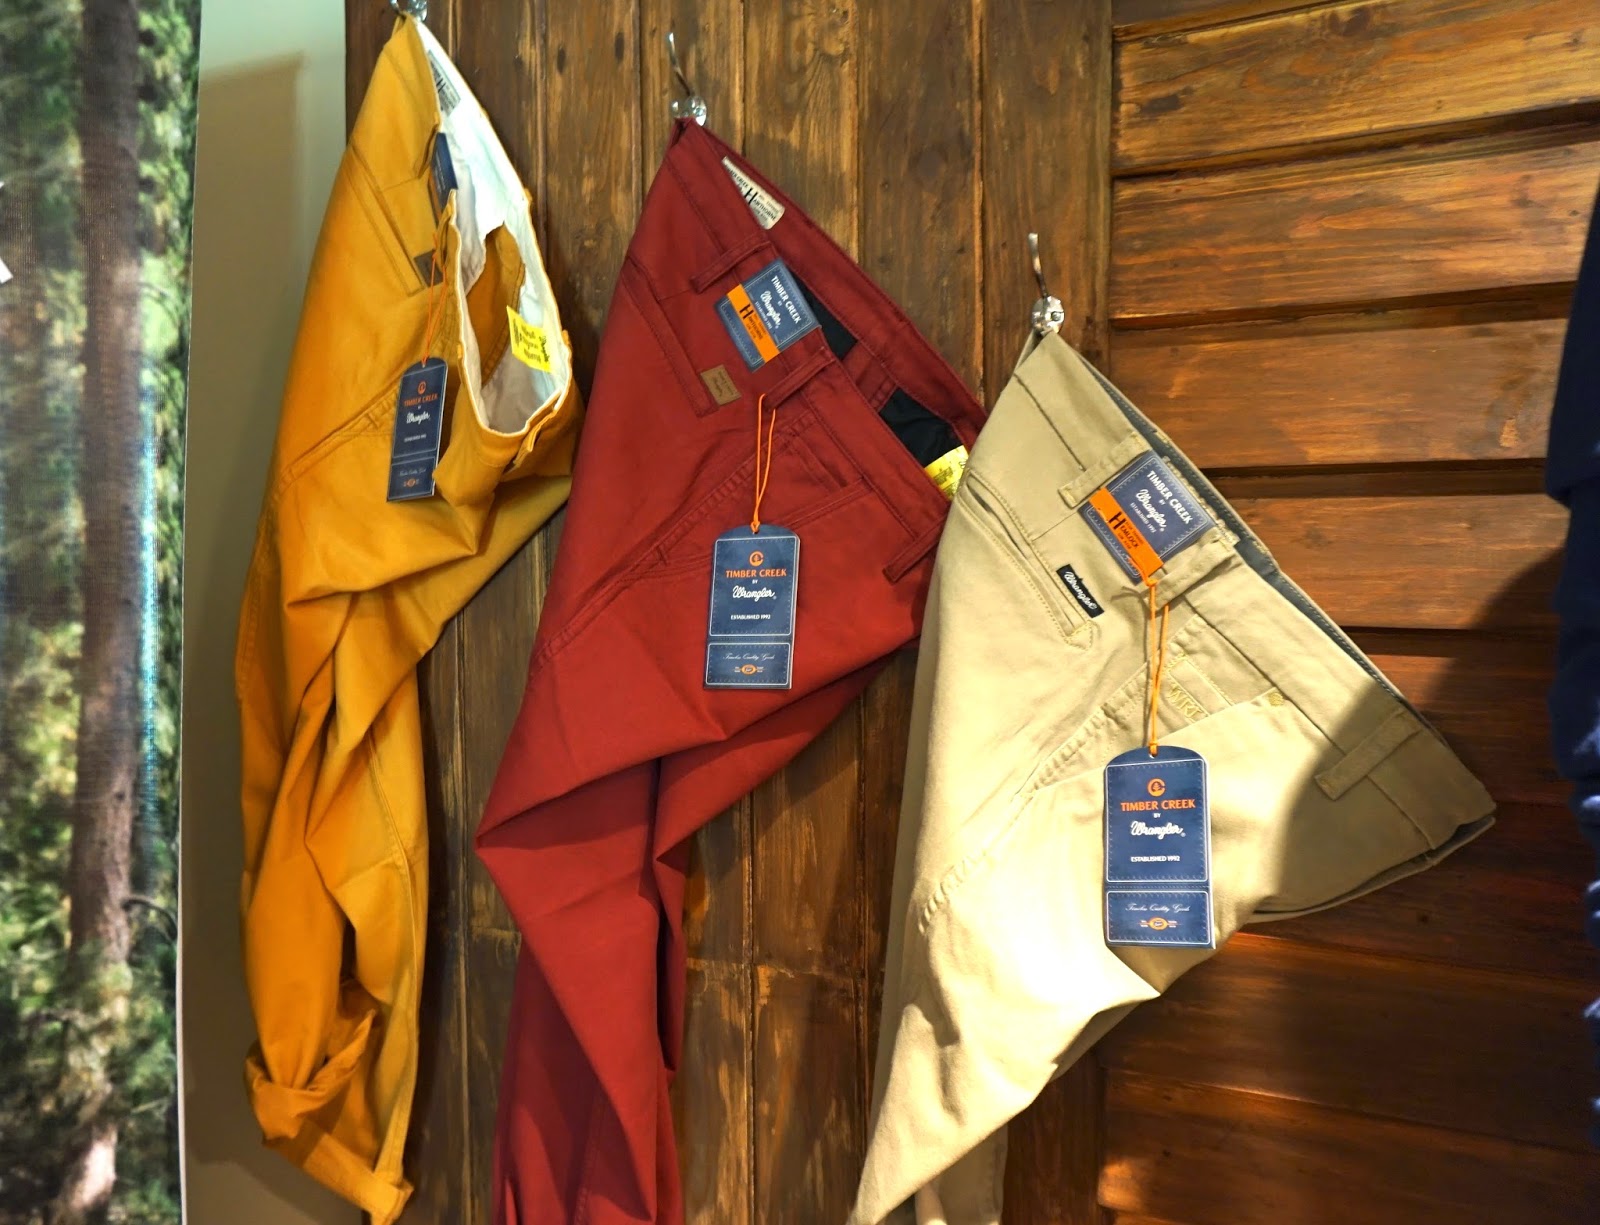 Wrangler launches Timber Creek For Men, their first non-denim collection